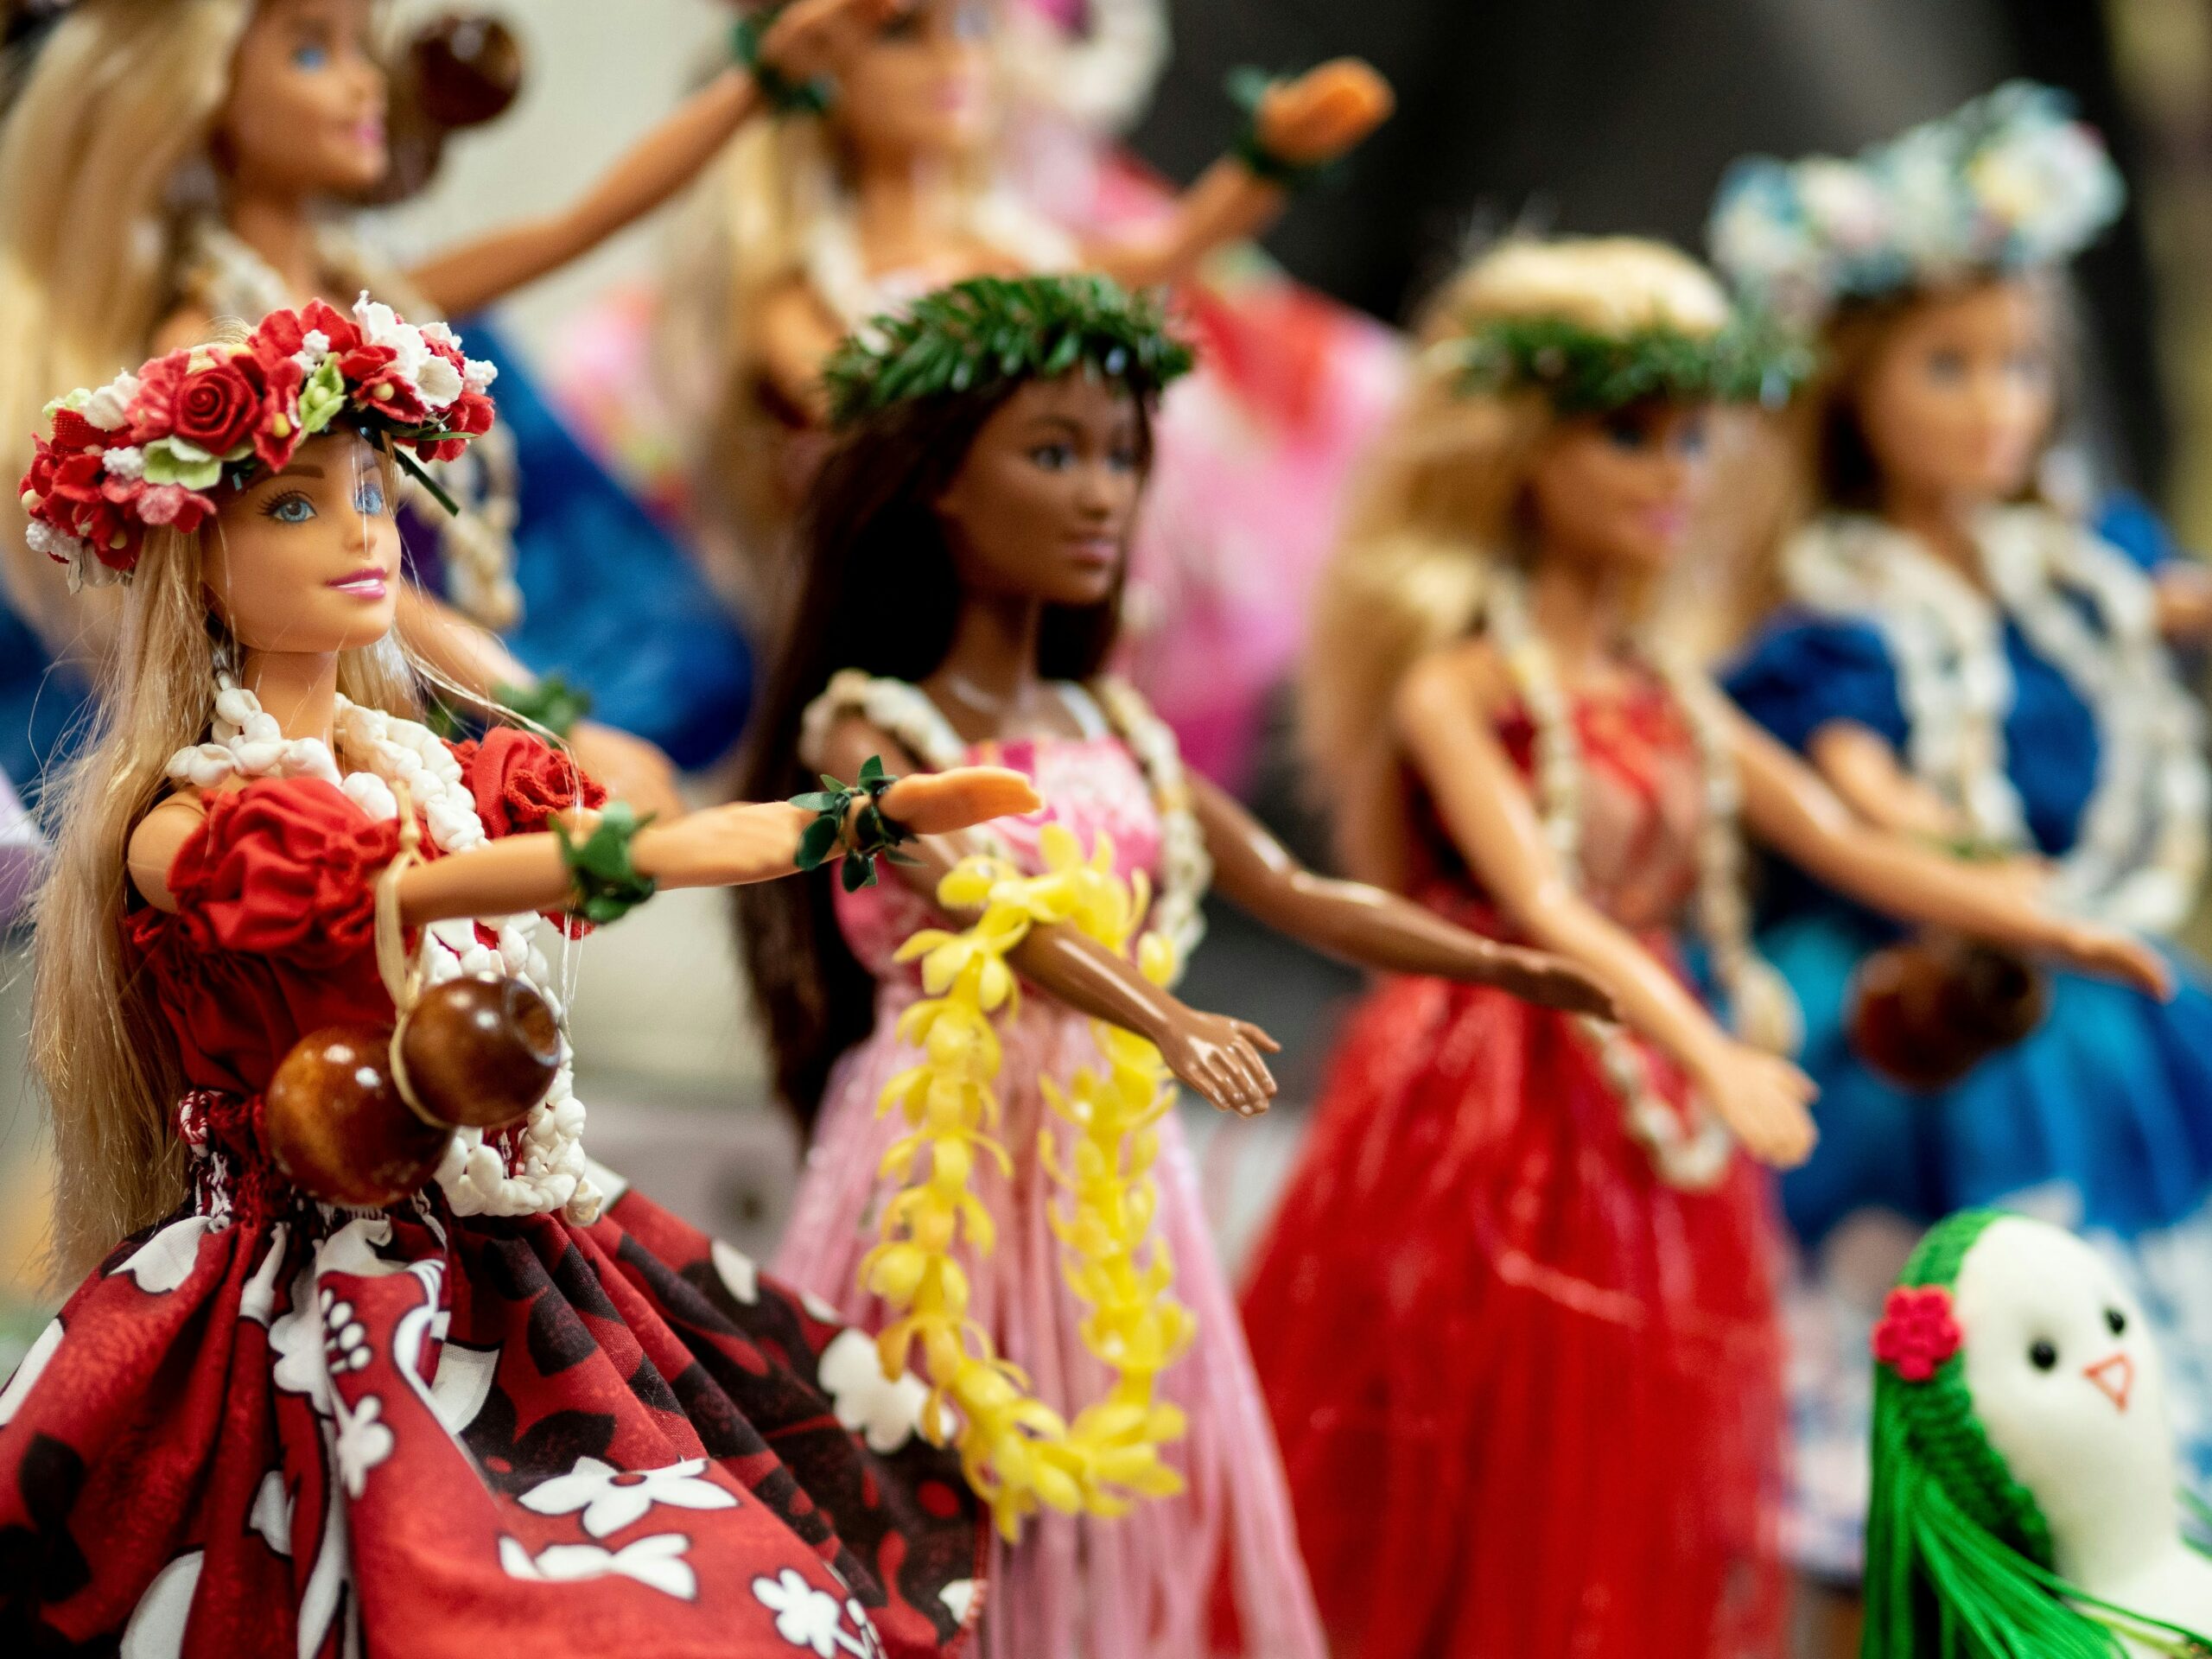 Barbie dolls representing the many facets of culture and diversity